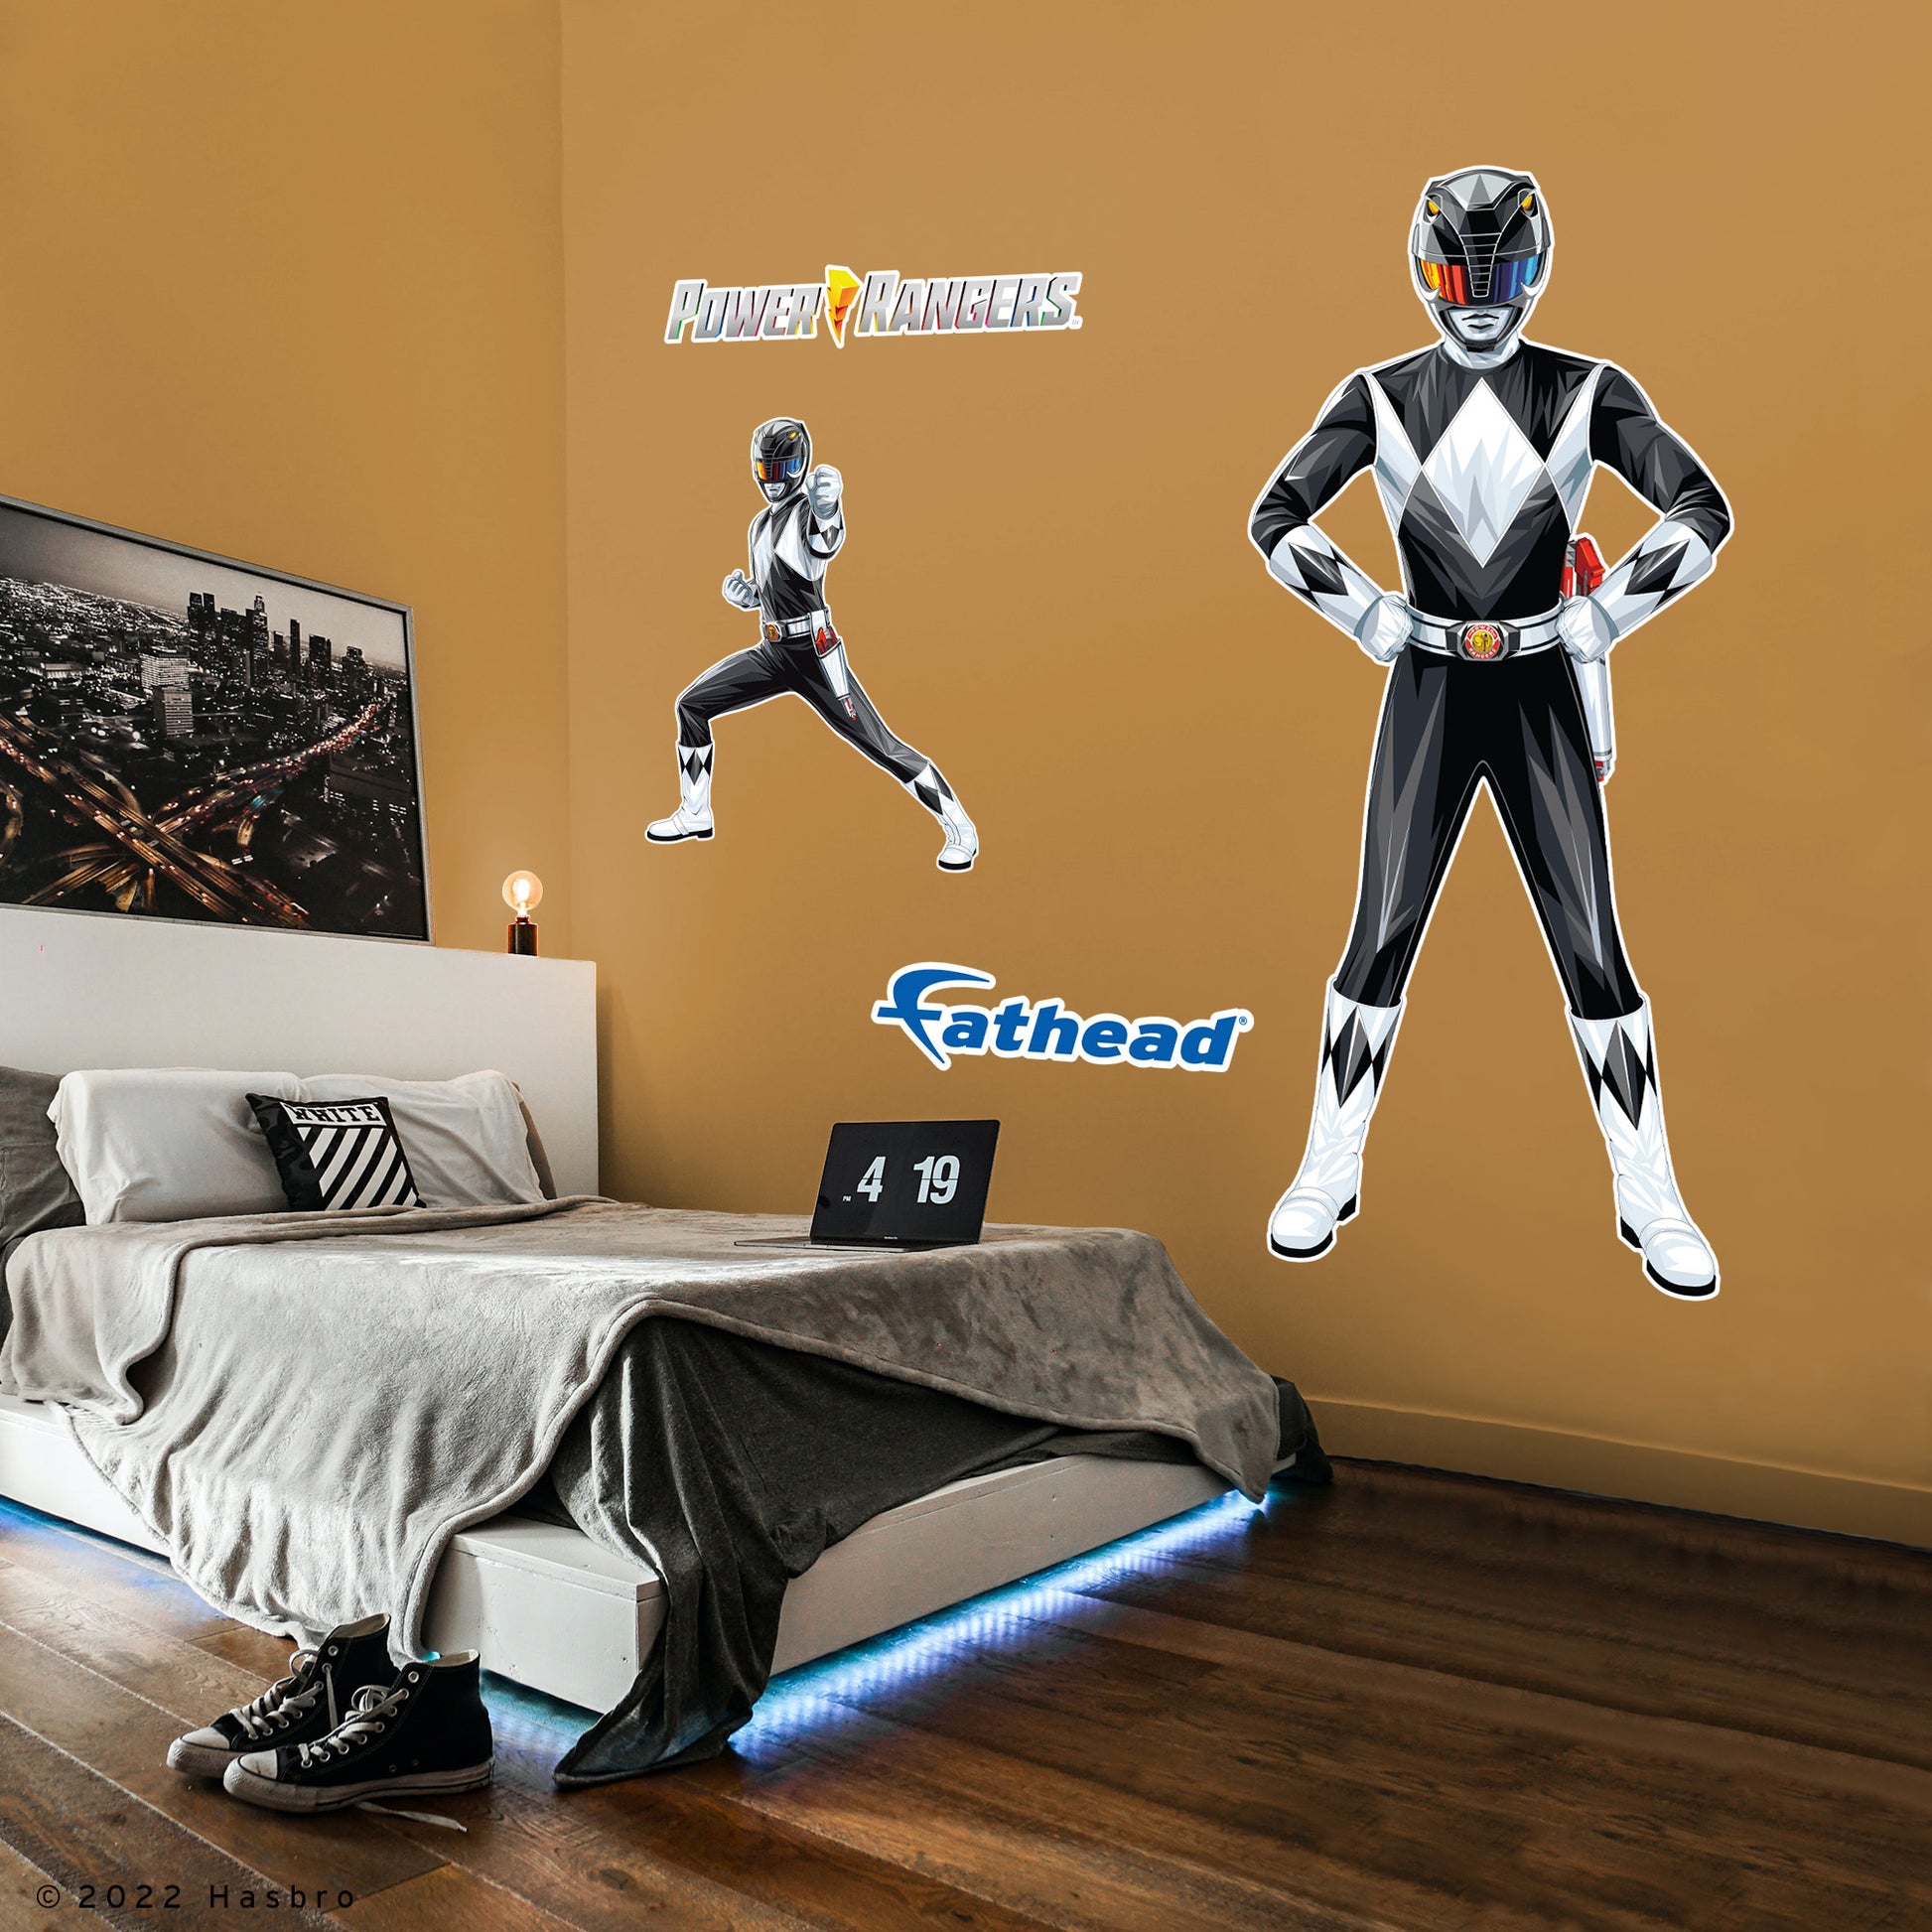 Life-Size Character +3 Decals (32.5"W x 72.5"H)